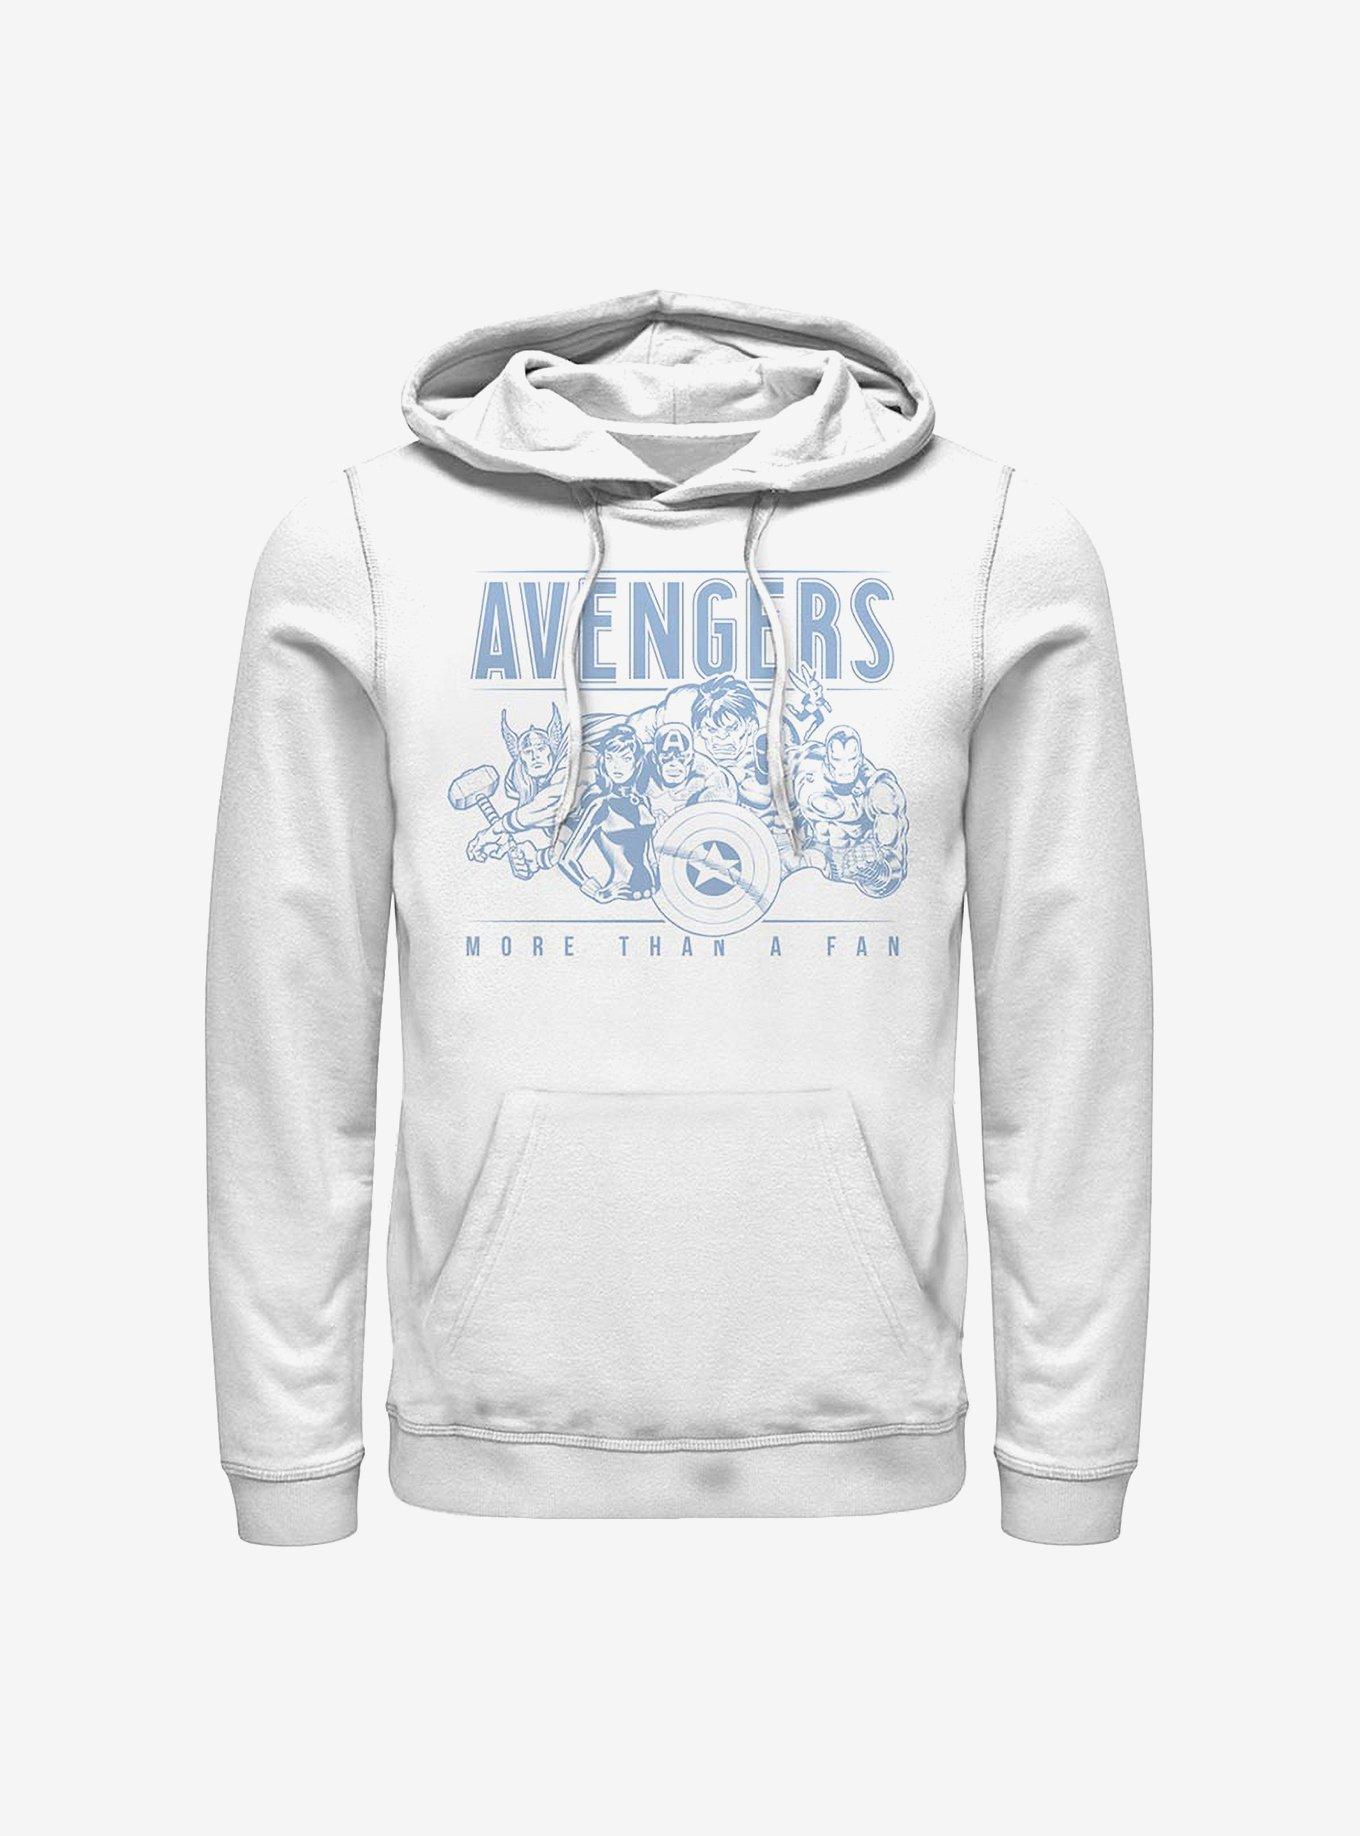 Marvel Avengers Team More Than A Fan Hoodie, WHITE, hi-res